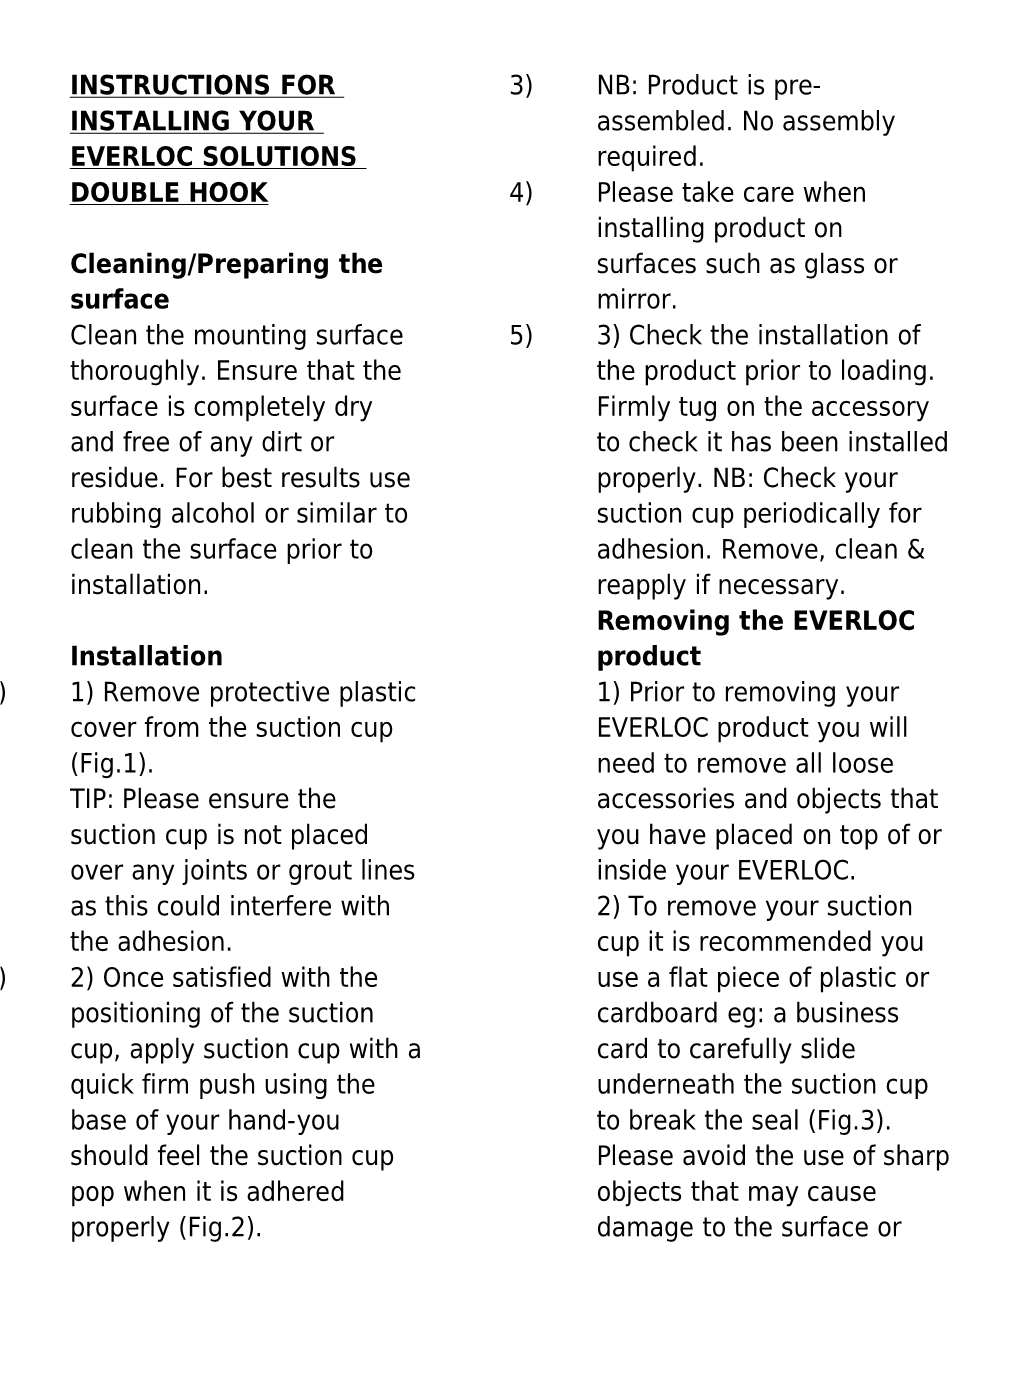 Instructions for Installing Your Everloc Solutions Double Hook